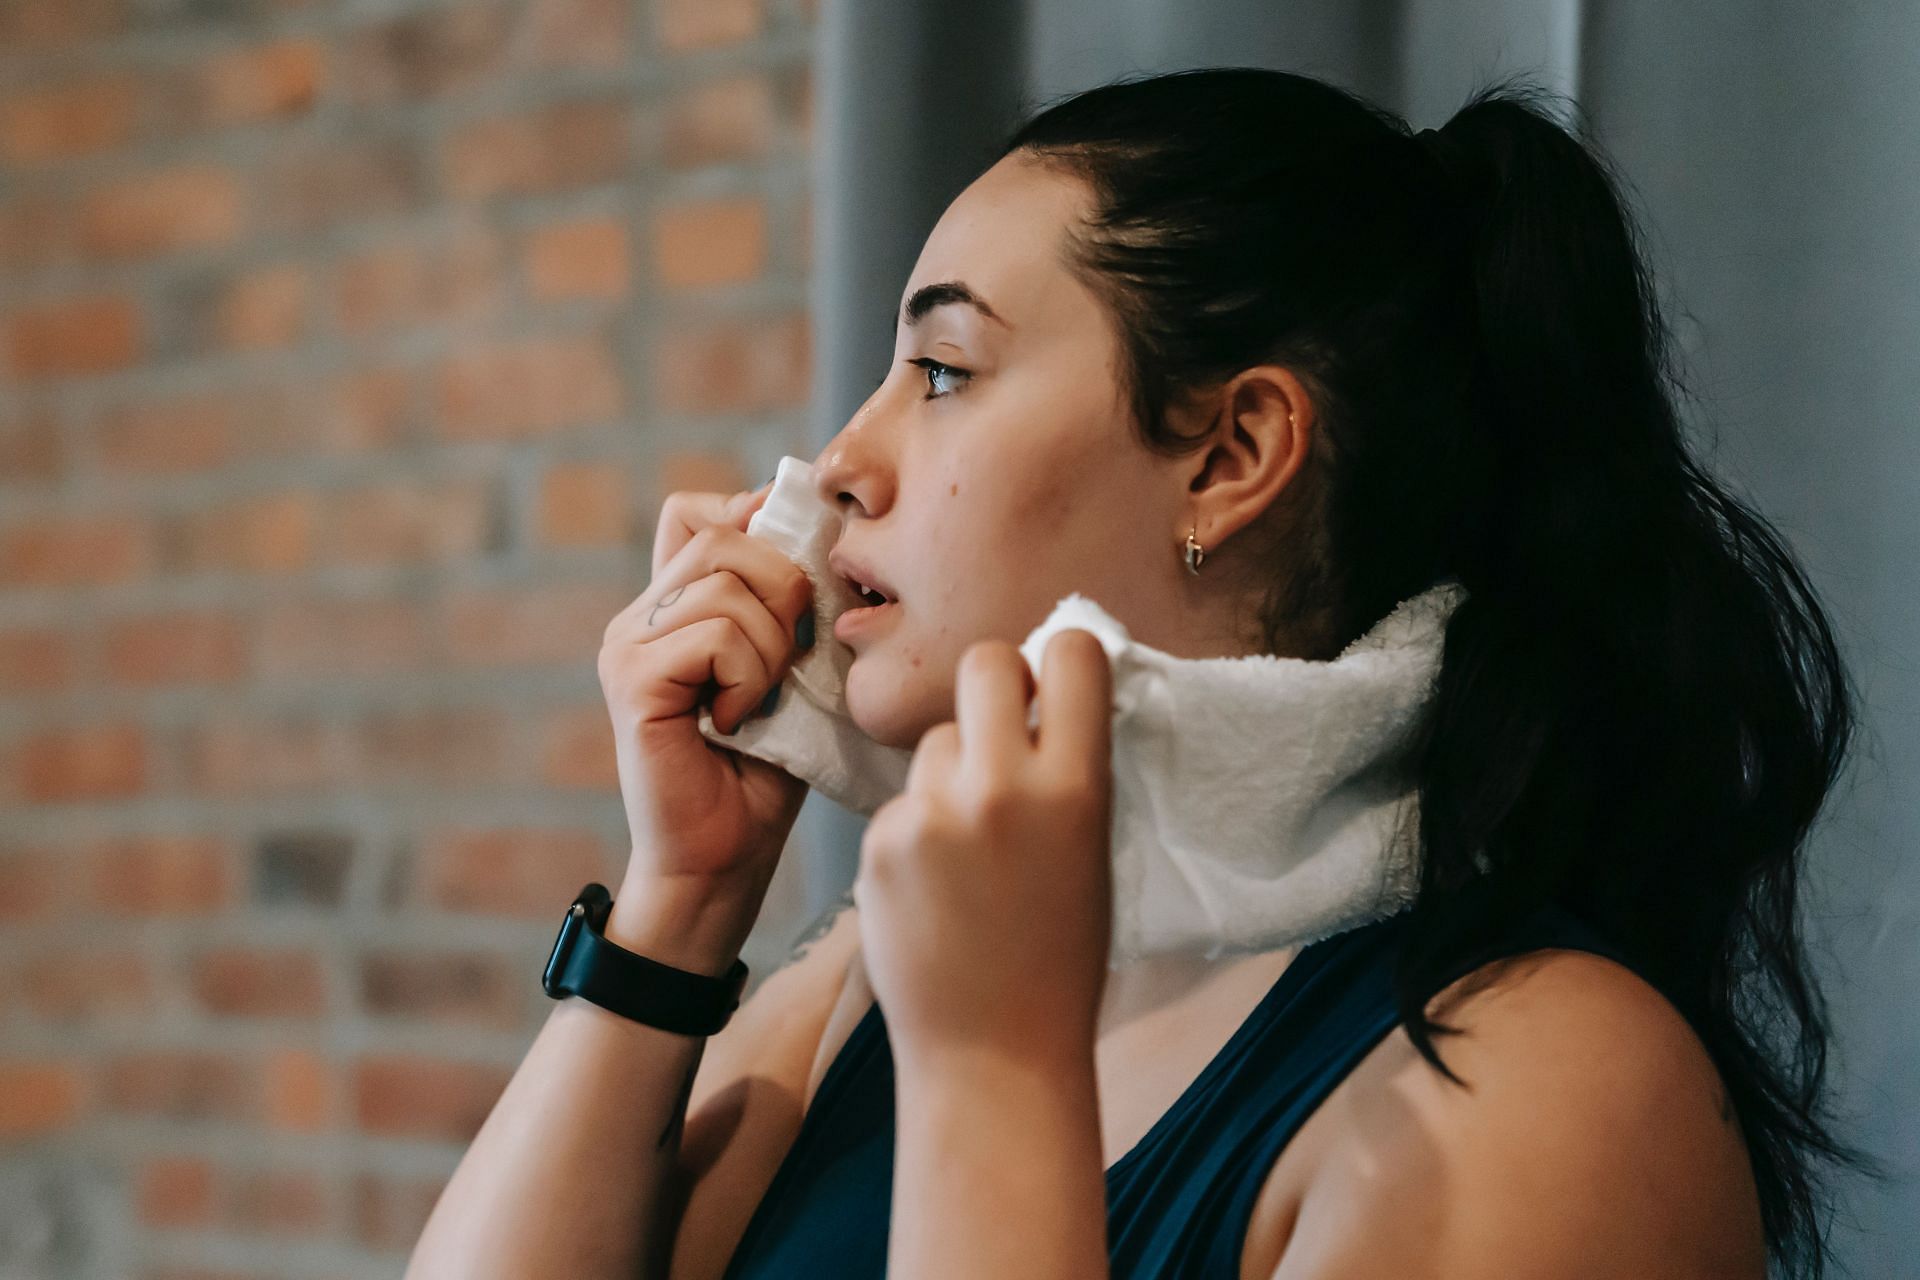 Sweating has other benefits, aside from regulating your body temperature. (Image via Pexels / Andres Ayrton)